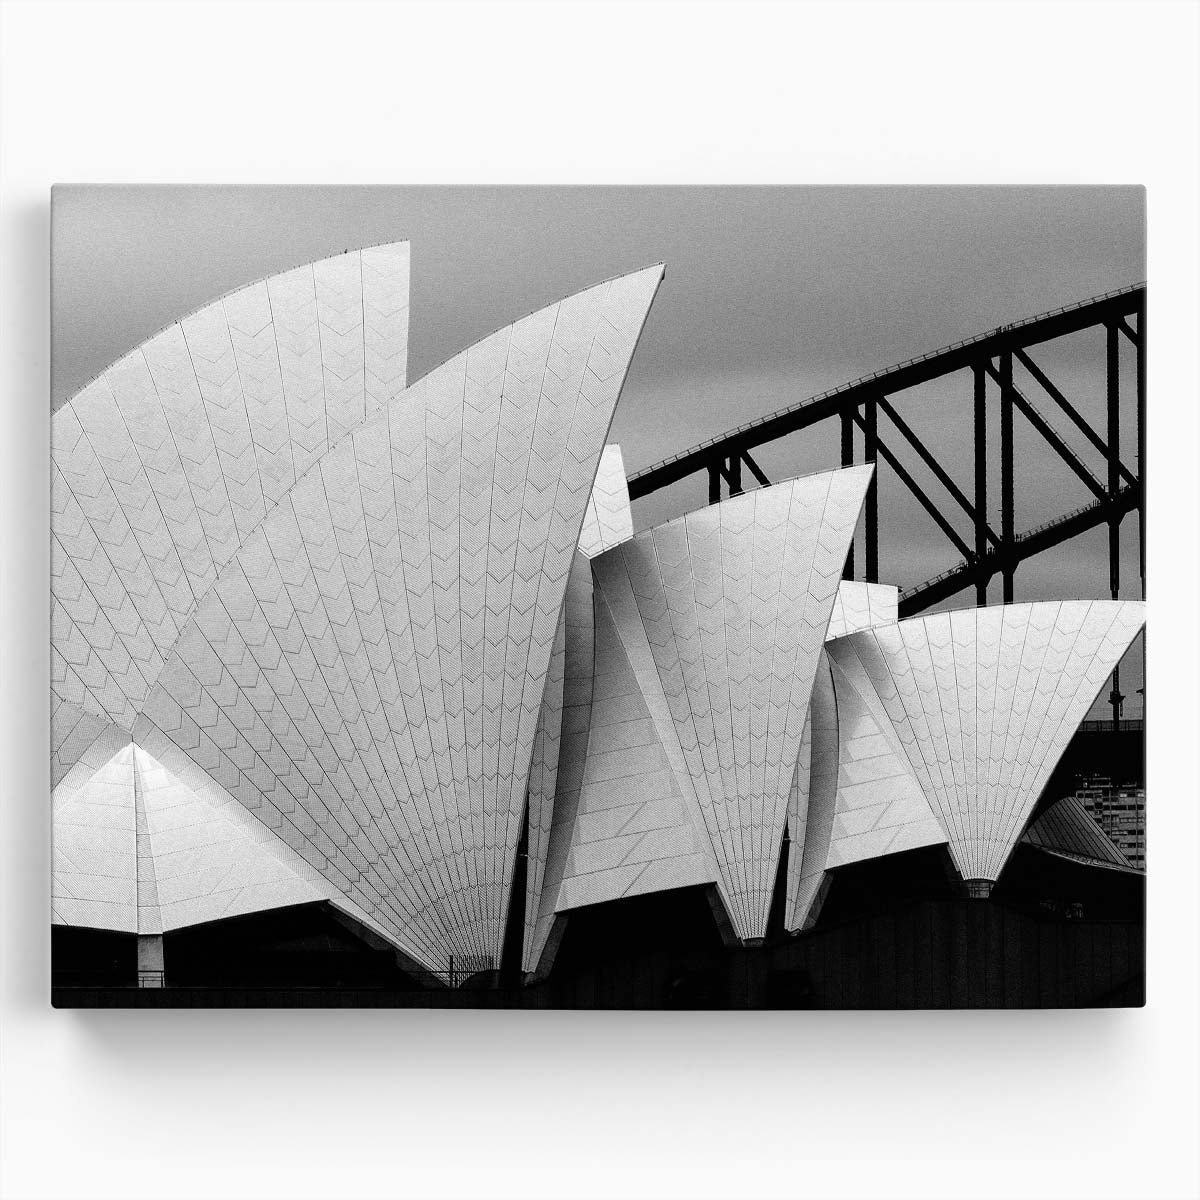 Iconic Sydney Opera House Monochrome Architecture Wall Art by Luxuriance Designs. Made in USA.